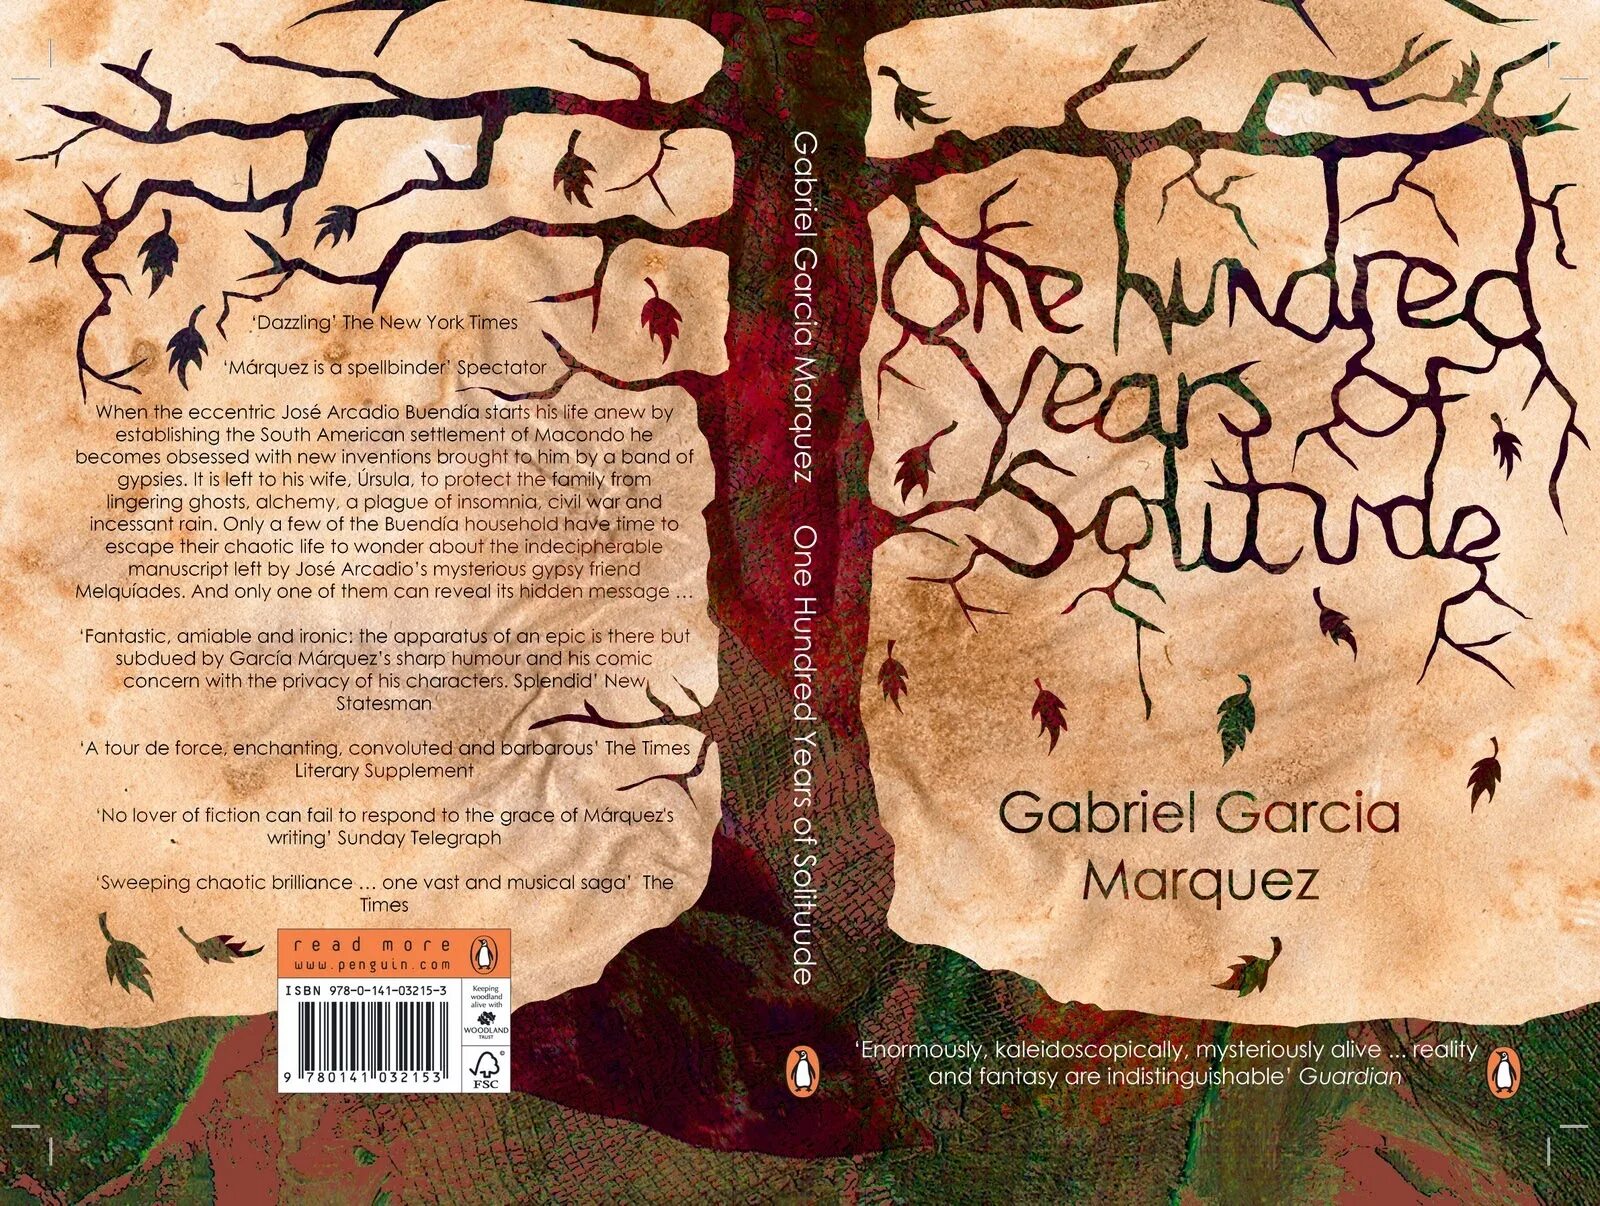 One hundred years is. One hundred years of Solitude by Gabriel Garcia Marquez. Hundred years of Solitude. One hundred years of Solitude. 100 Years of Solitude by Gabriel García Márquez.